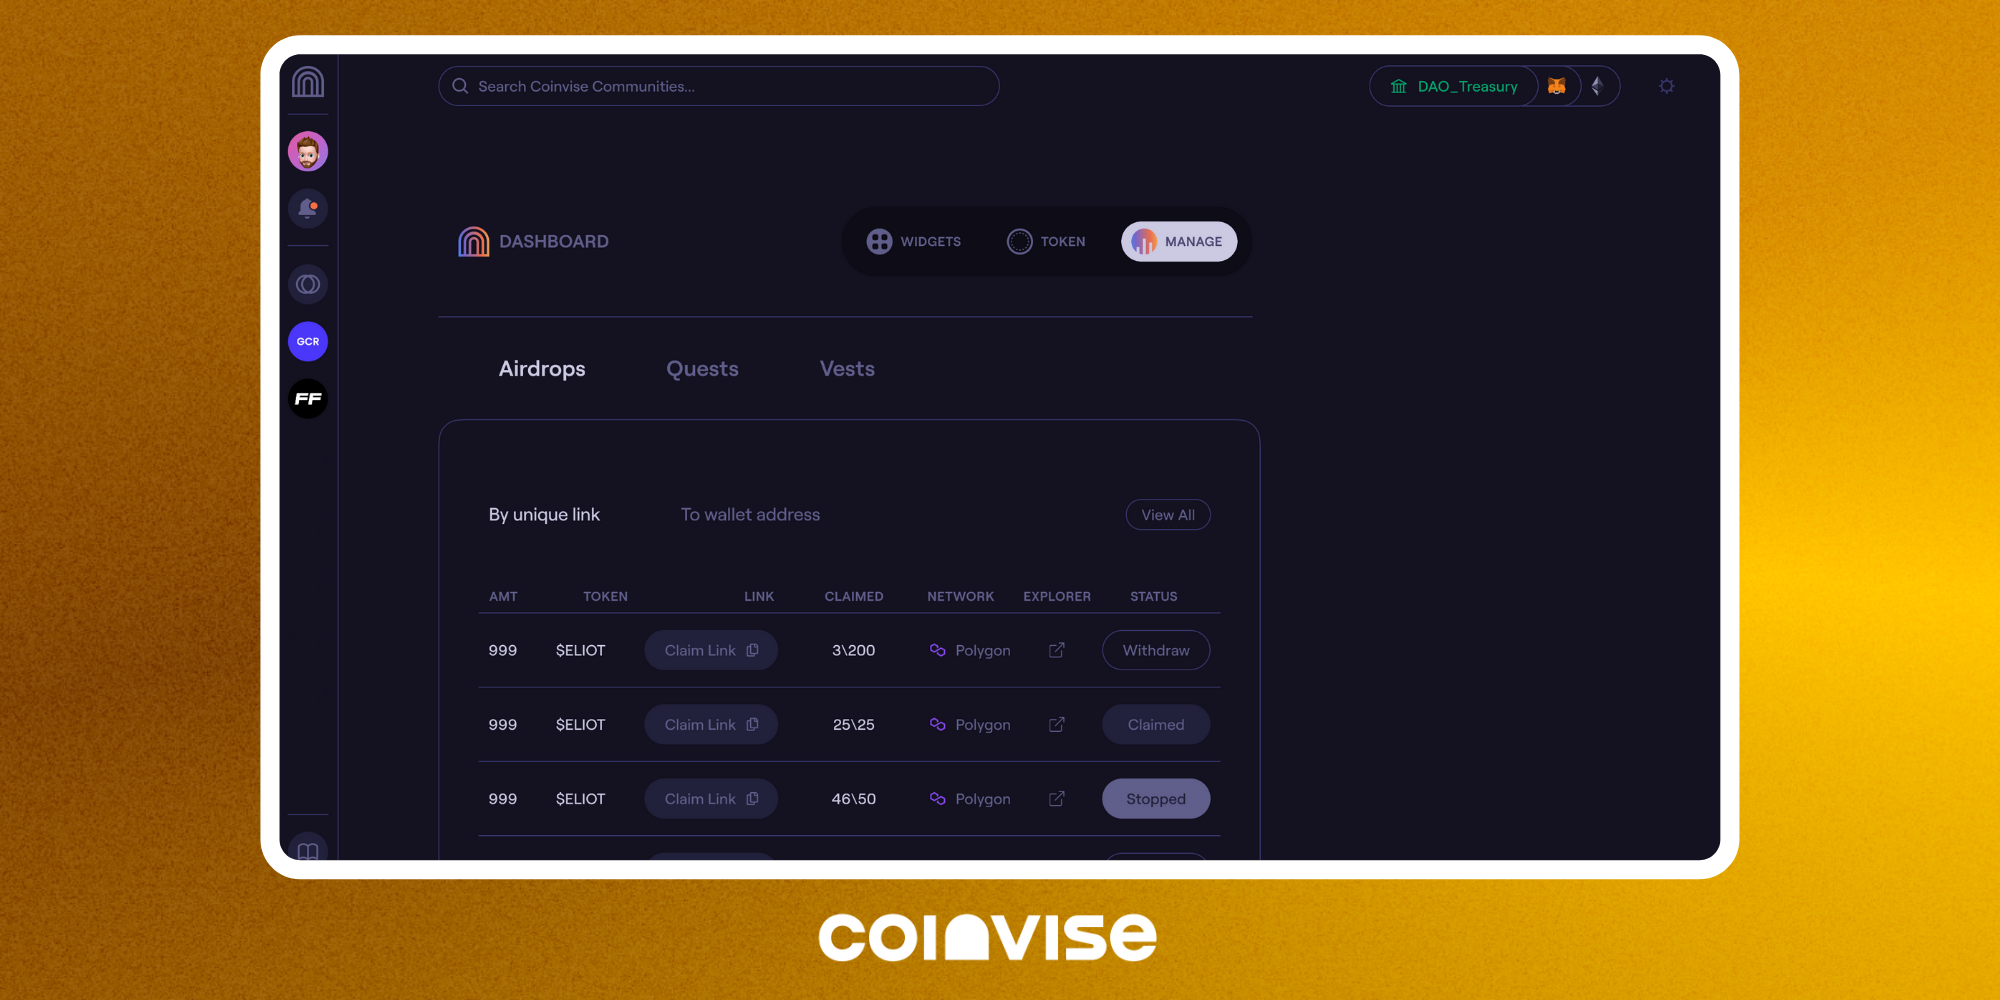 Coinvise's Dashboard - Manage Tab